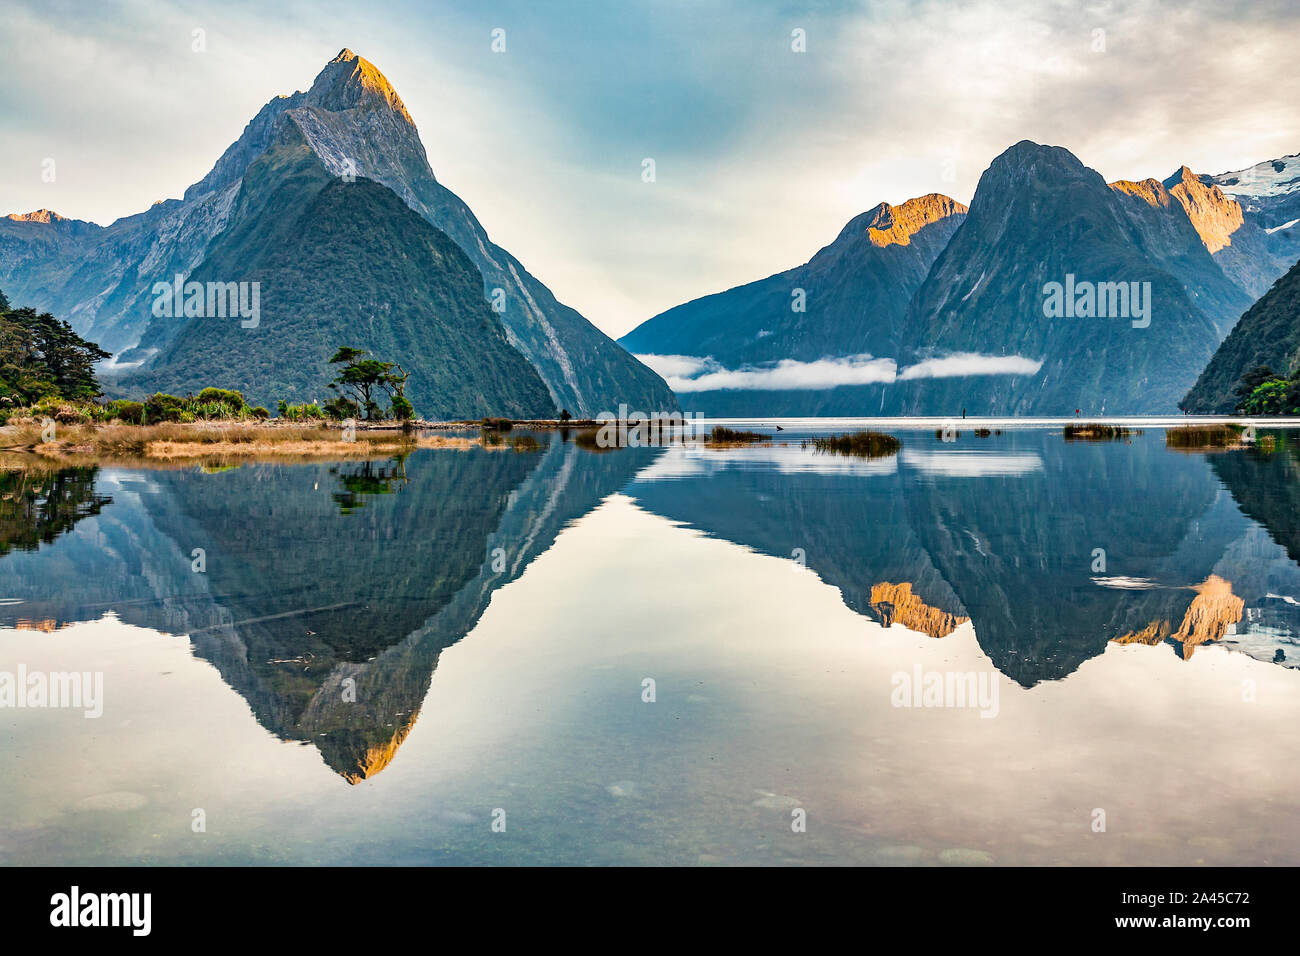 Milford Sound, probably New Zealand's most famous tourist destination, on a beautiful calm sunny morning. Stock Photo